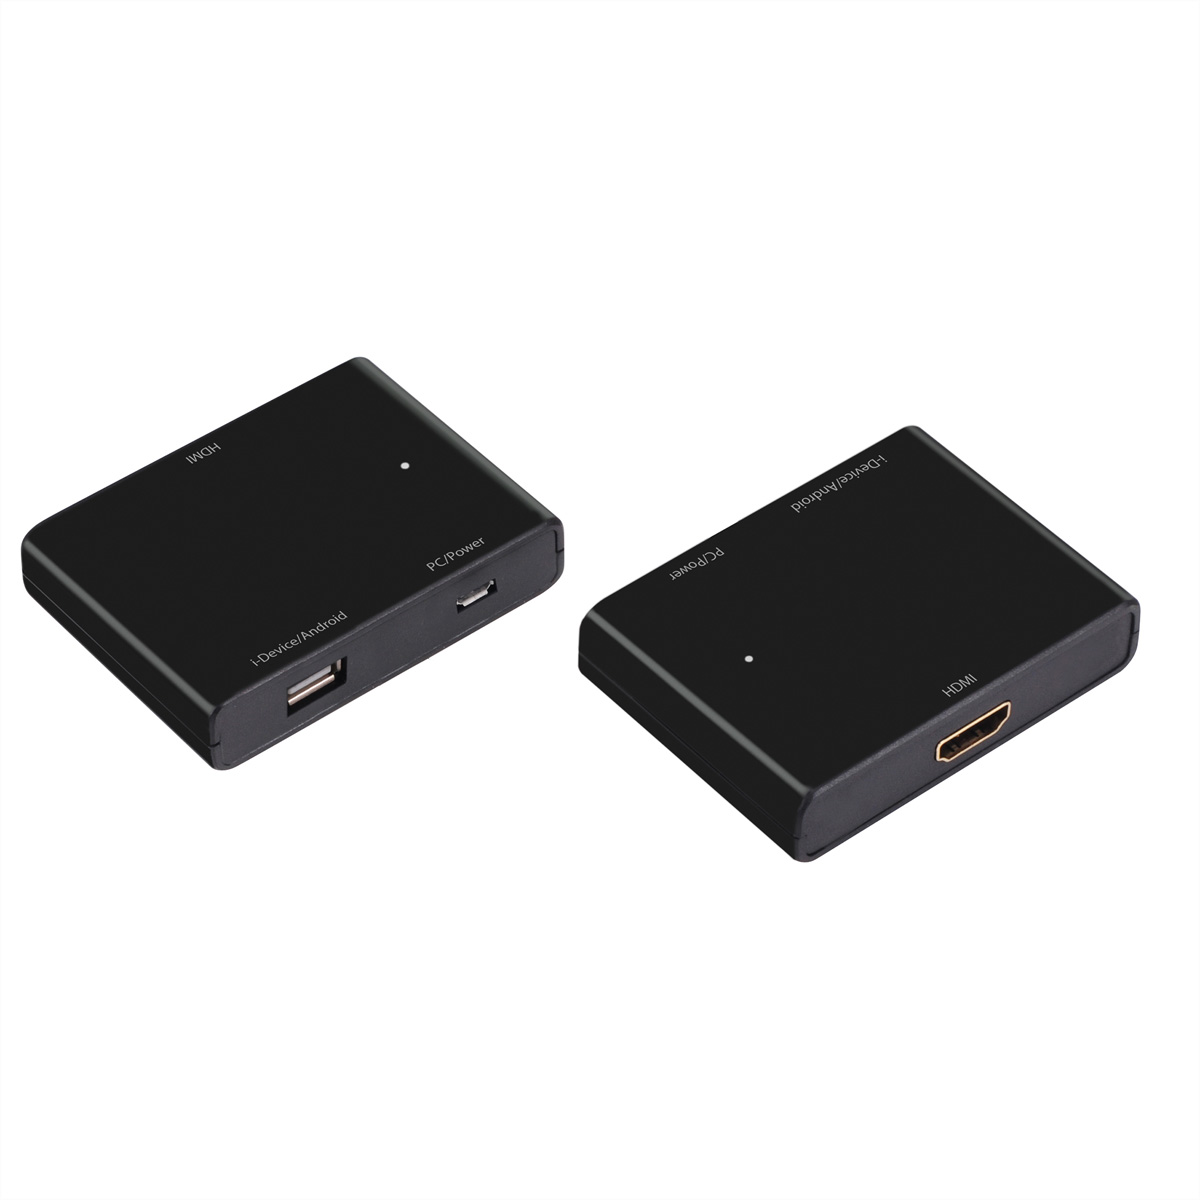 VALUE Smartphone (iPhone/Android) zu HDMI Adapter